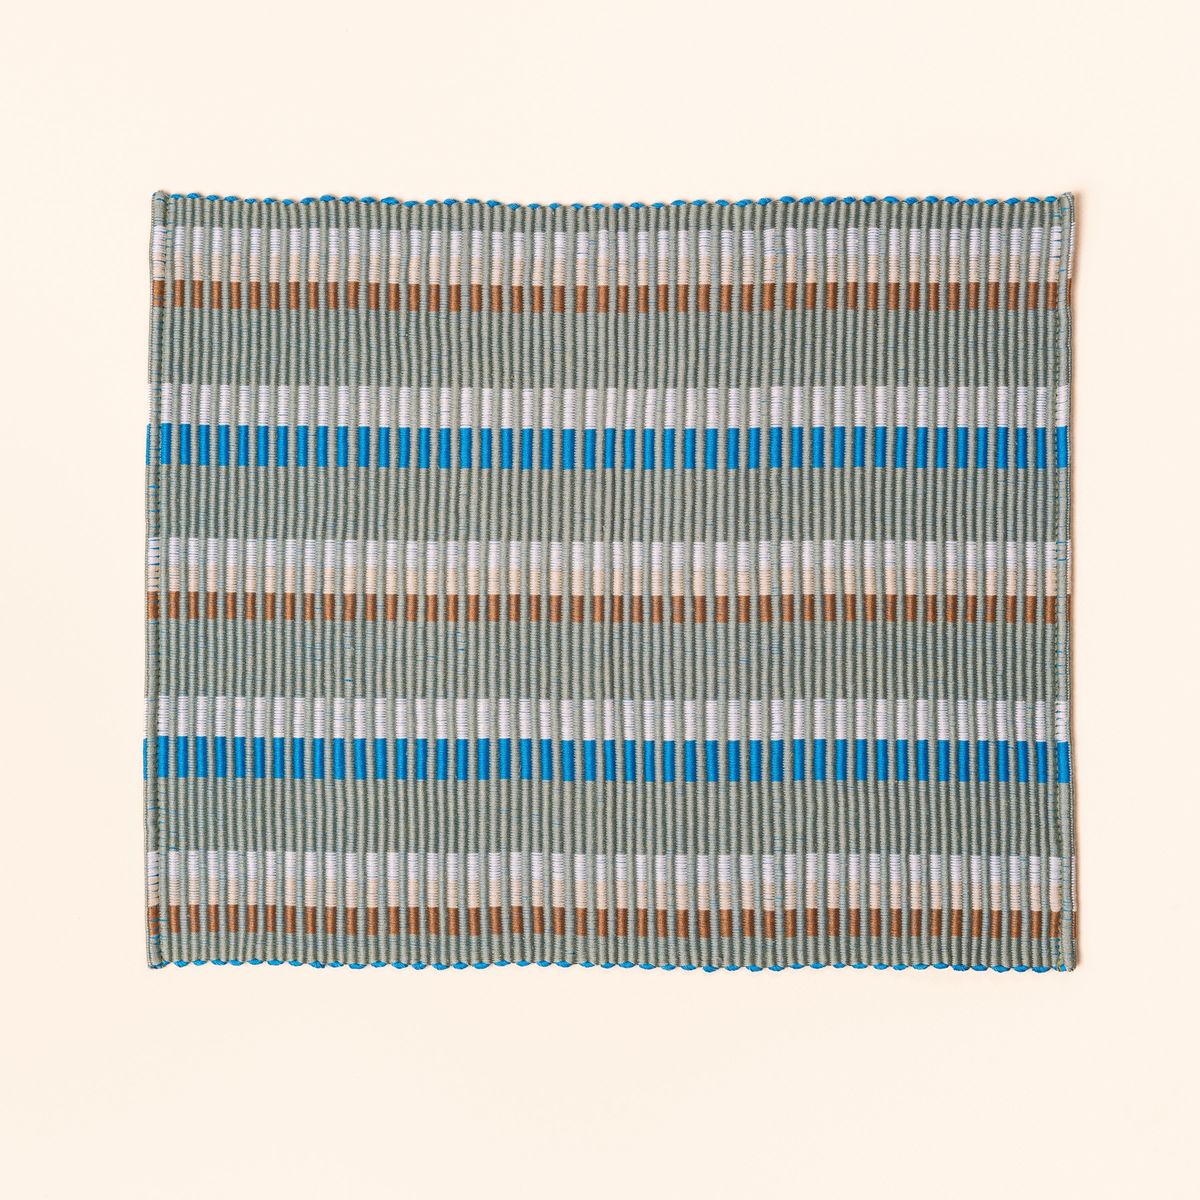 Rectangle placemat with offset stripe design that is hand woven in sage, blue, and orange colors